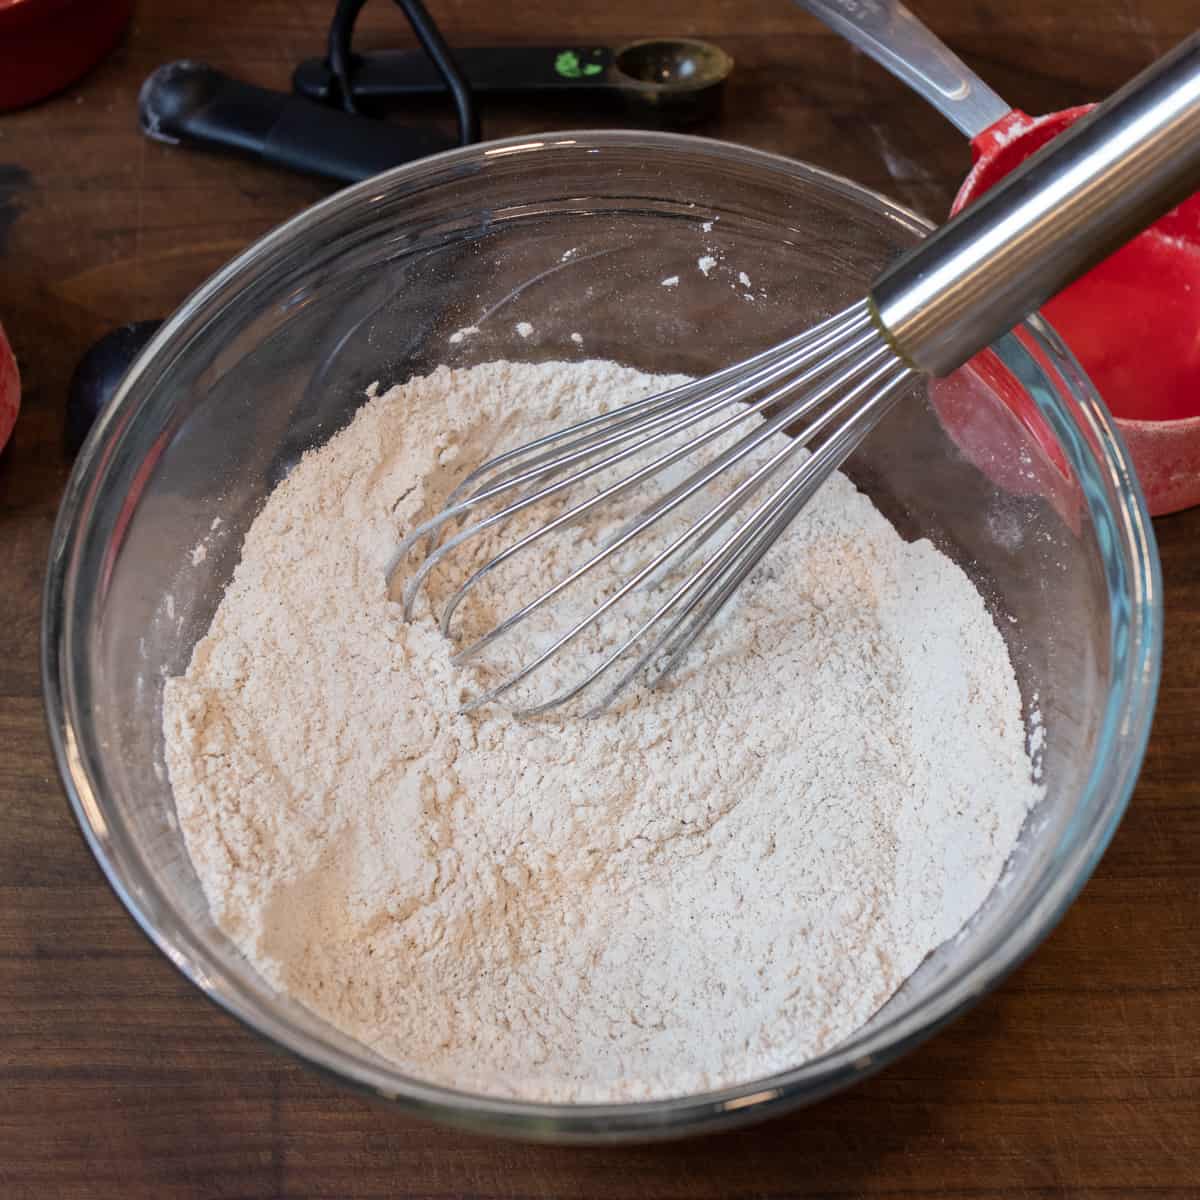 Sifted dry ingredients in a glass bowl